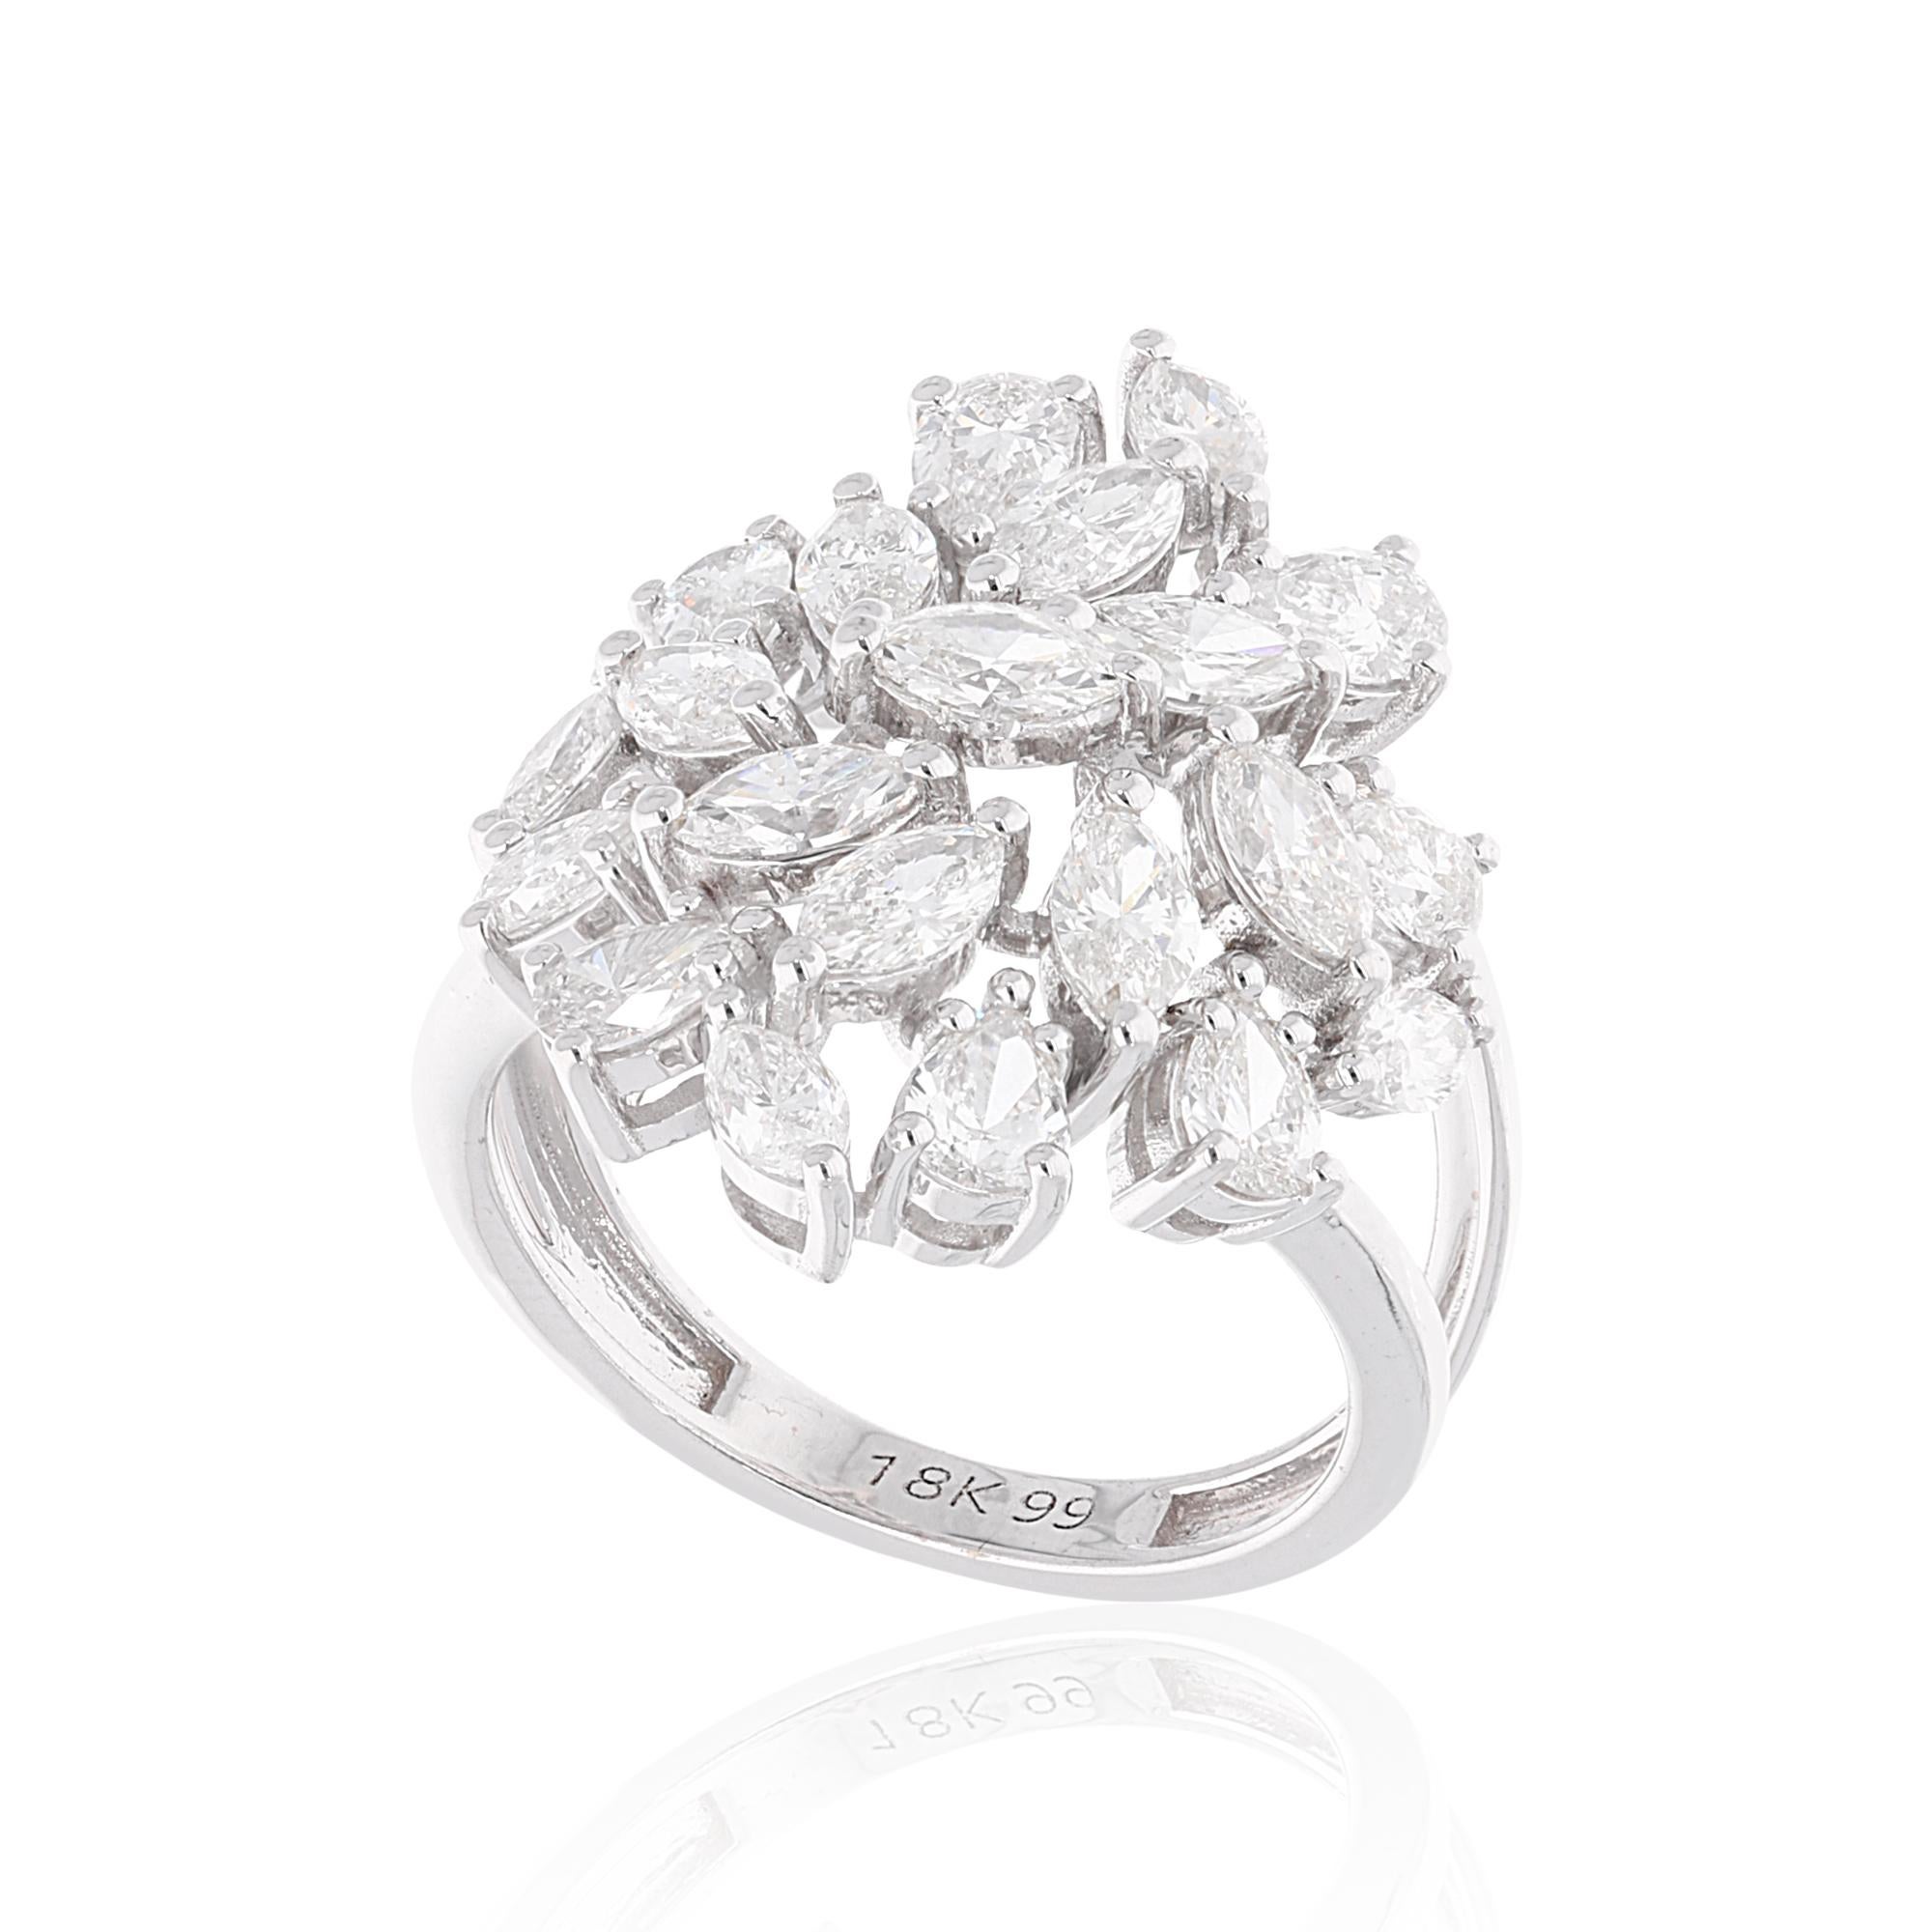 For Sale:  2.81 Carat SI/HI Marquise Pear Diamond Cluster Ring 18 Karat White Gold Jewelry 3